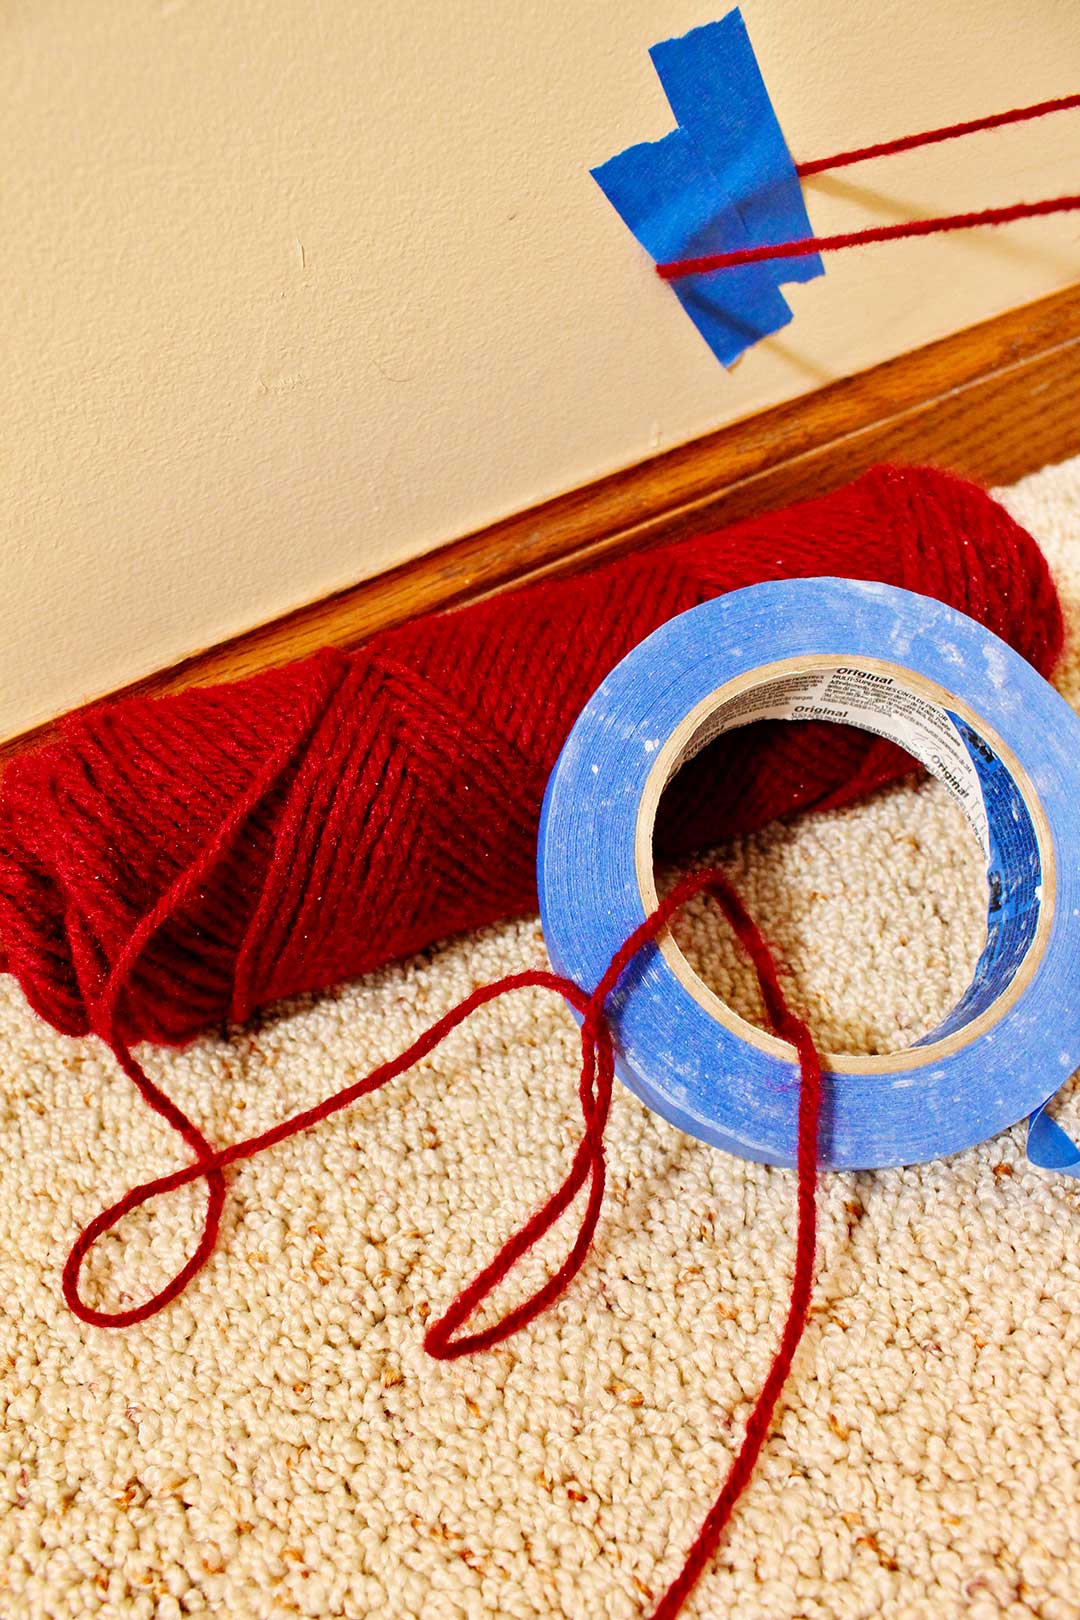 Skein of red yarn and blue painters tape lay on the carpeted floor with a piece of yarn taped to the wall with blue painters tape.